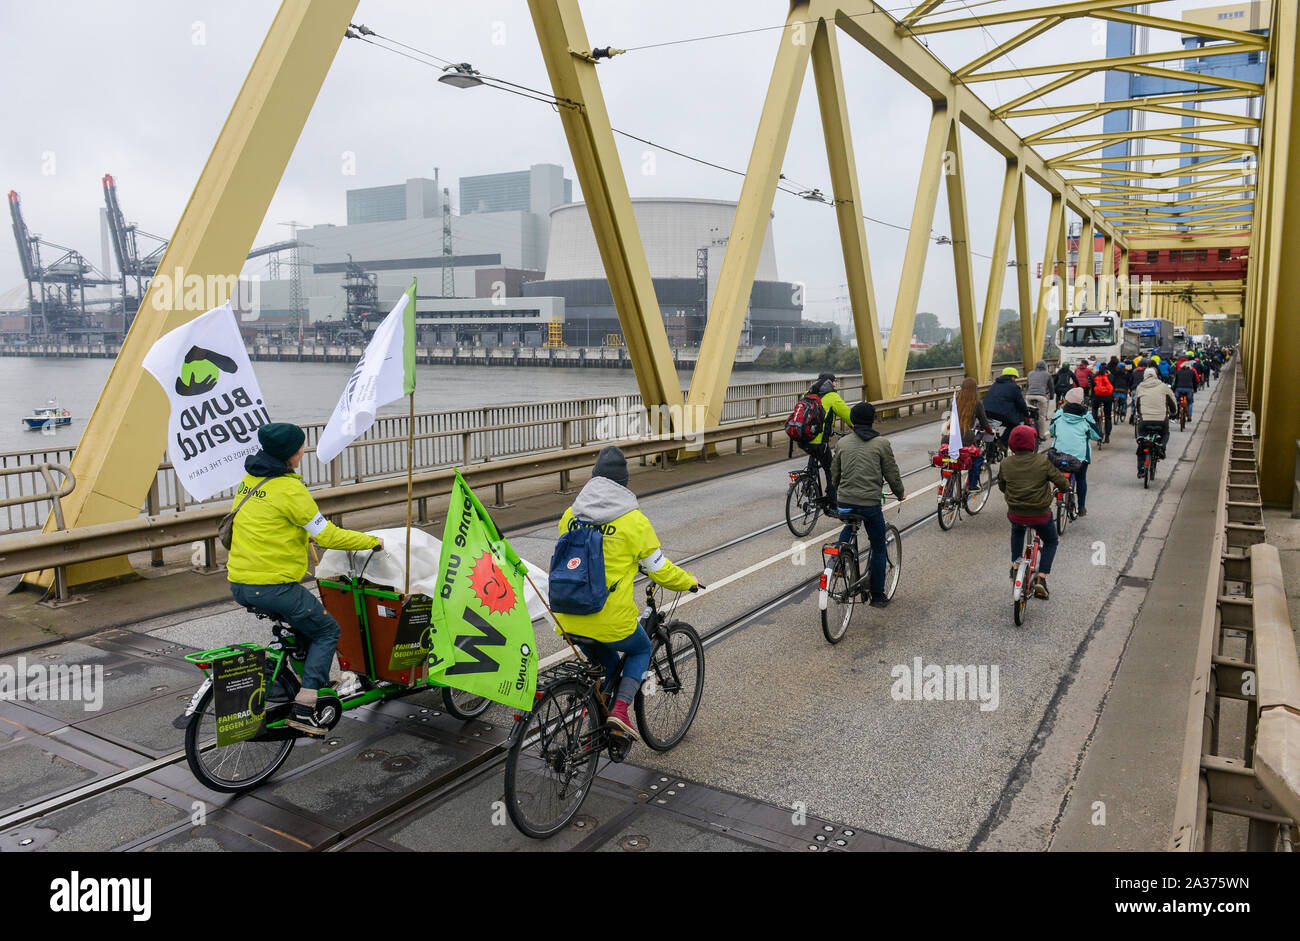 GERMANY, Hamburg , Fridays for future protest demo at Vattenfall coal power station Moorburg to protest against coal burning and hard coal imports, activists with bicycle on Kattwyk bridge Stock Photo